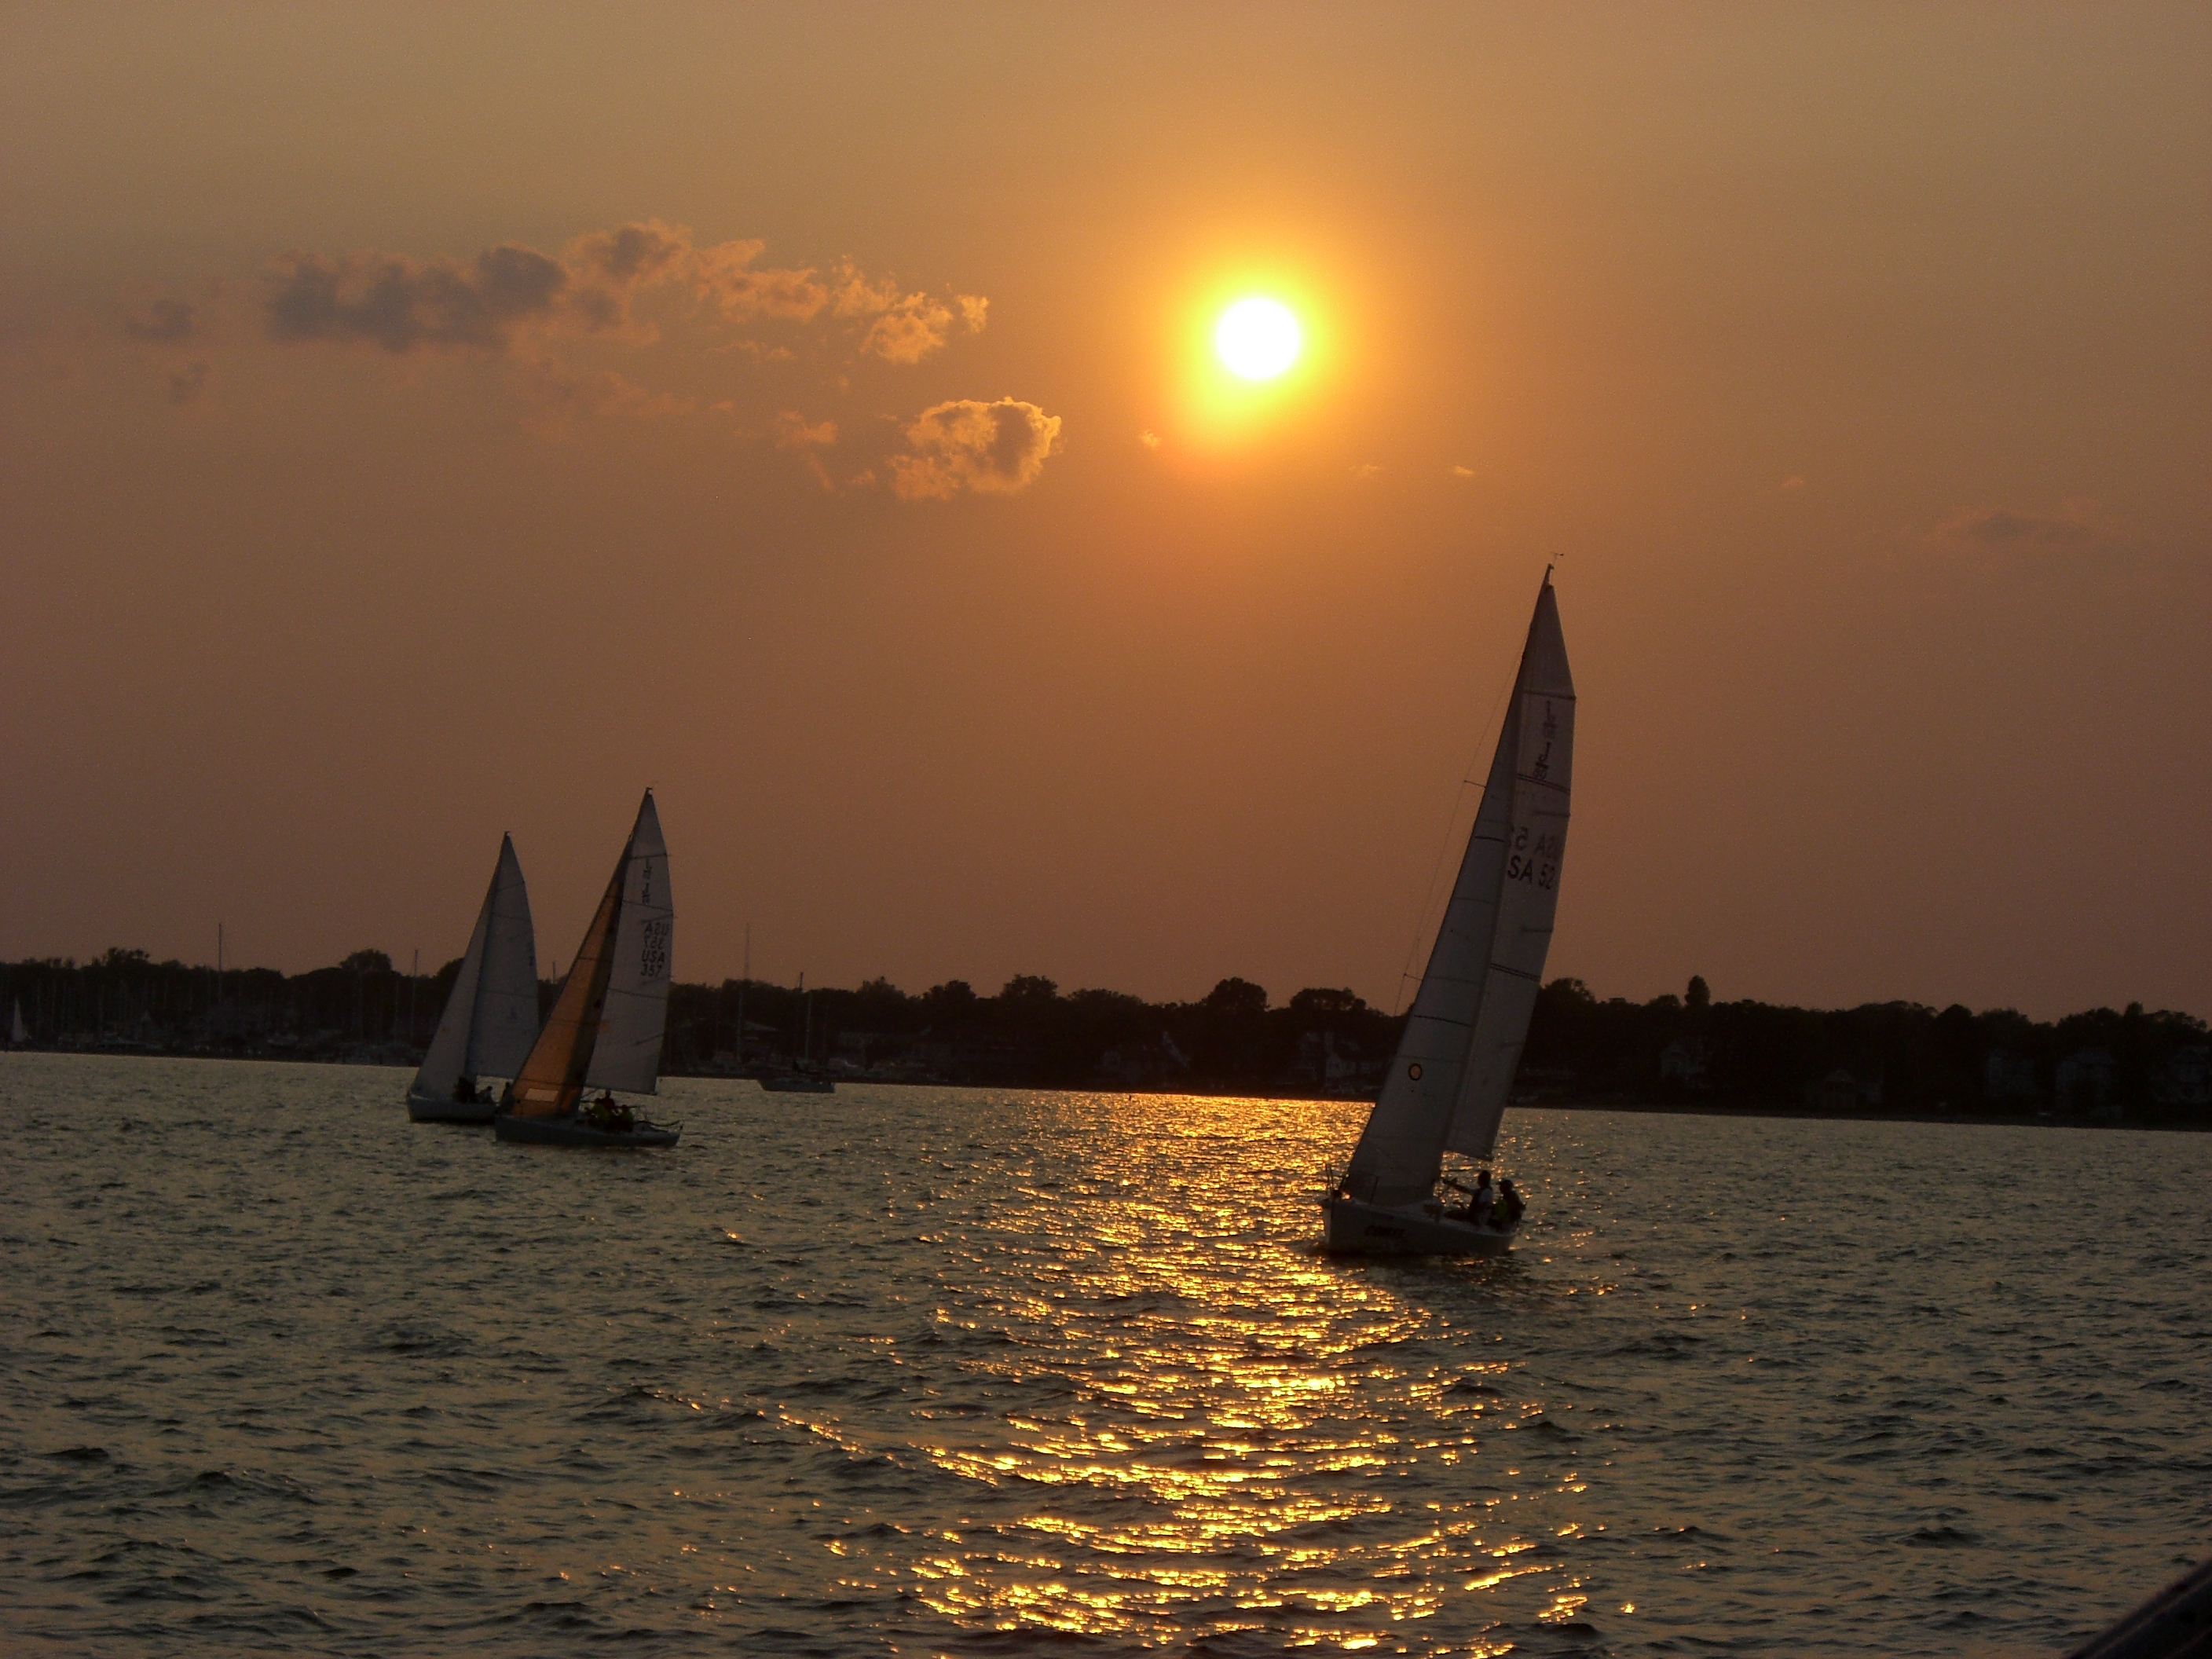 Sails in the golden sunset